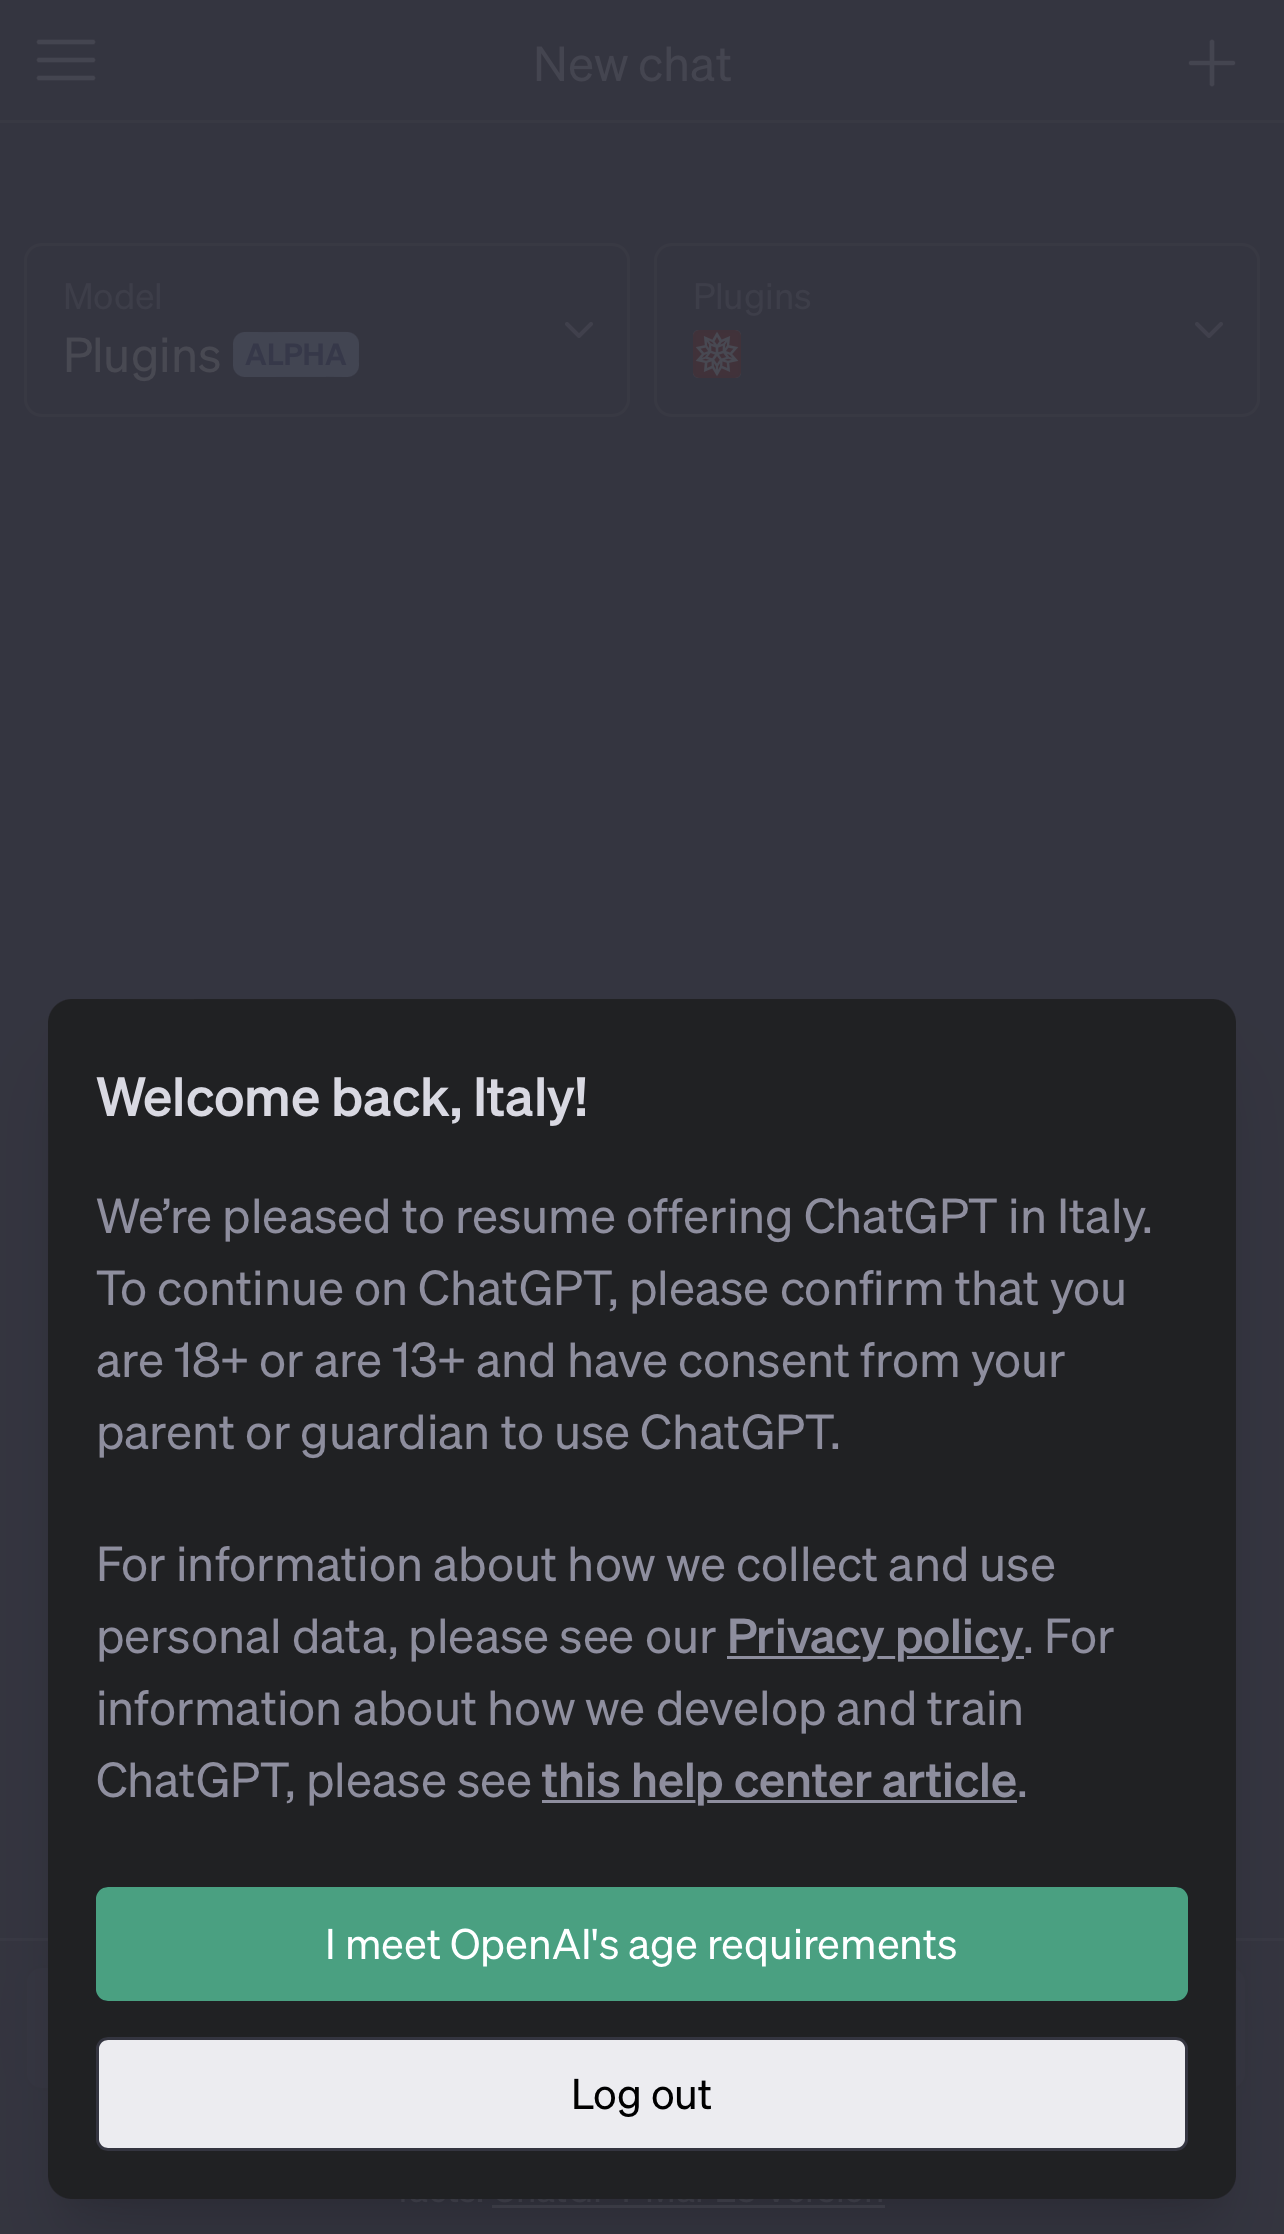 ChatGPT ban lifted: OpenAI complies with Italian data protection regulations as EU AI law moves forward